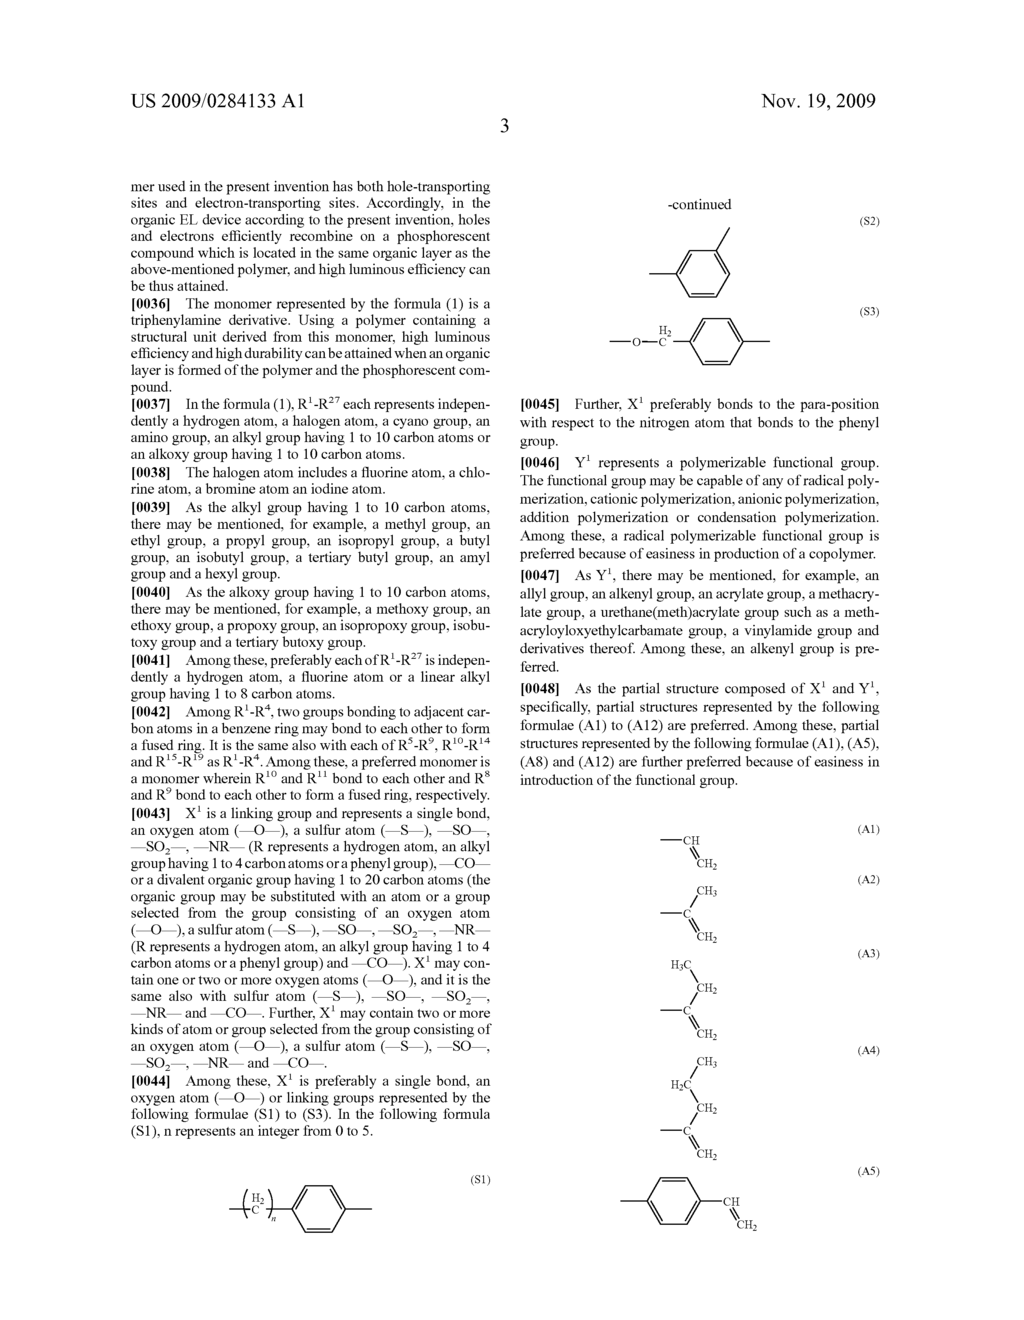 ORGANIC ELECTROLUMINESCENCE DEVICE USING A COPOLYMER AND A PHOSPHORESCENT COMPOUND - diagram, schematic, and image 05